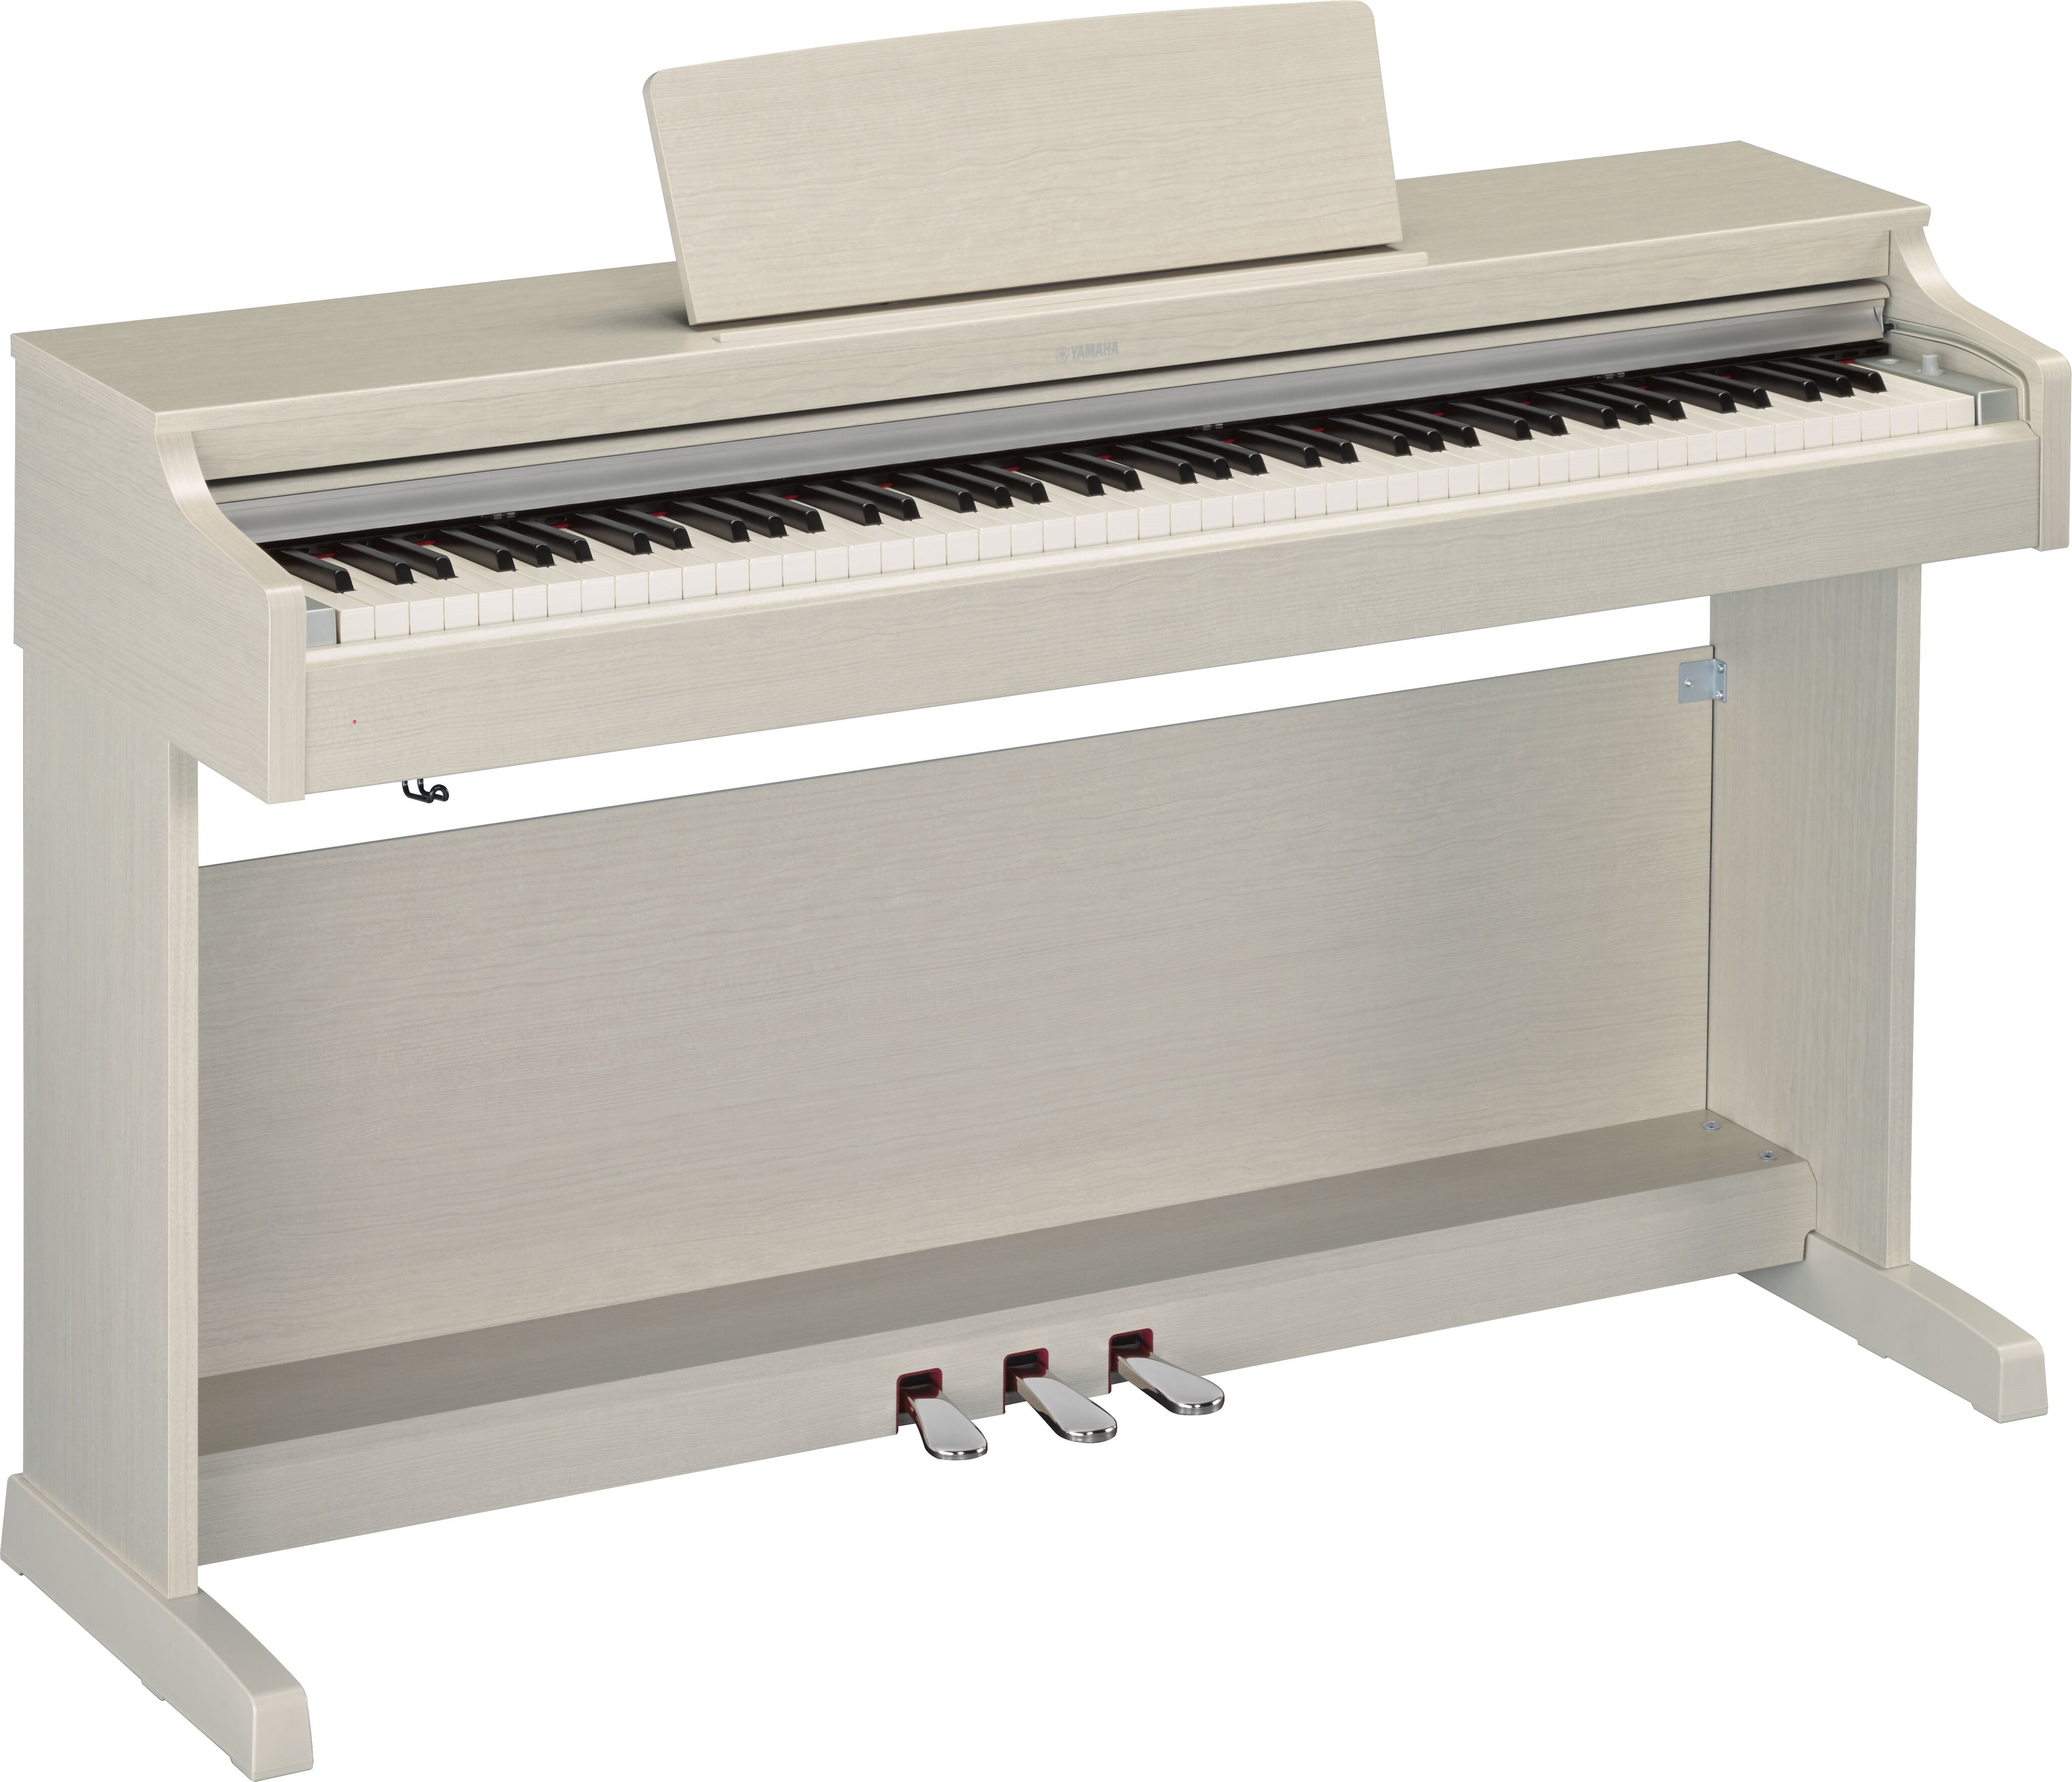 YDP-163 - Overview - ARIUS - Pianos - Musical Instruments - Products -  Yamaha - Other European Countries